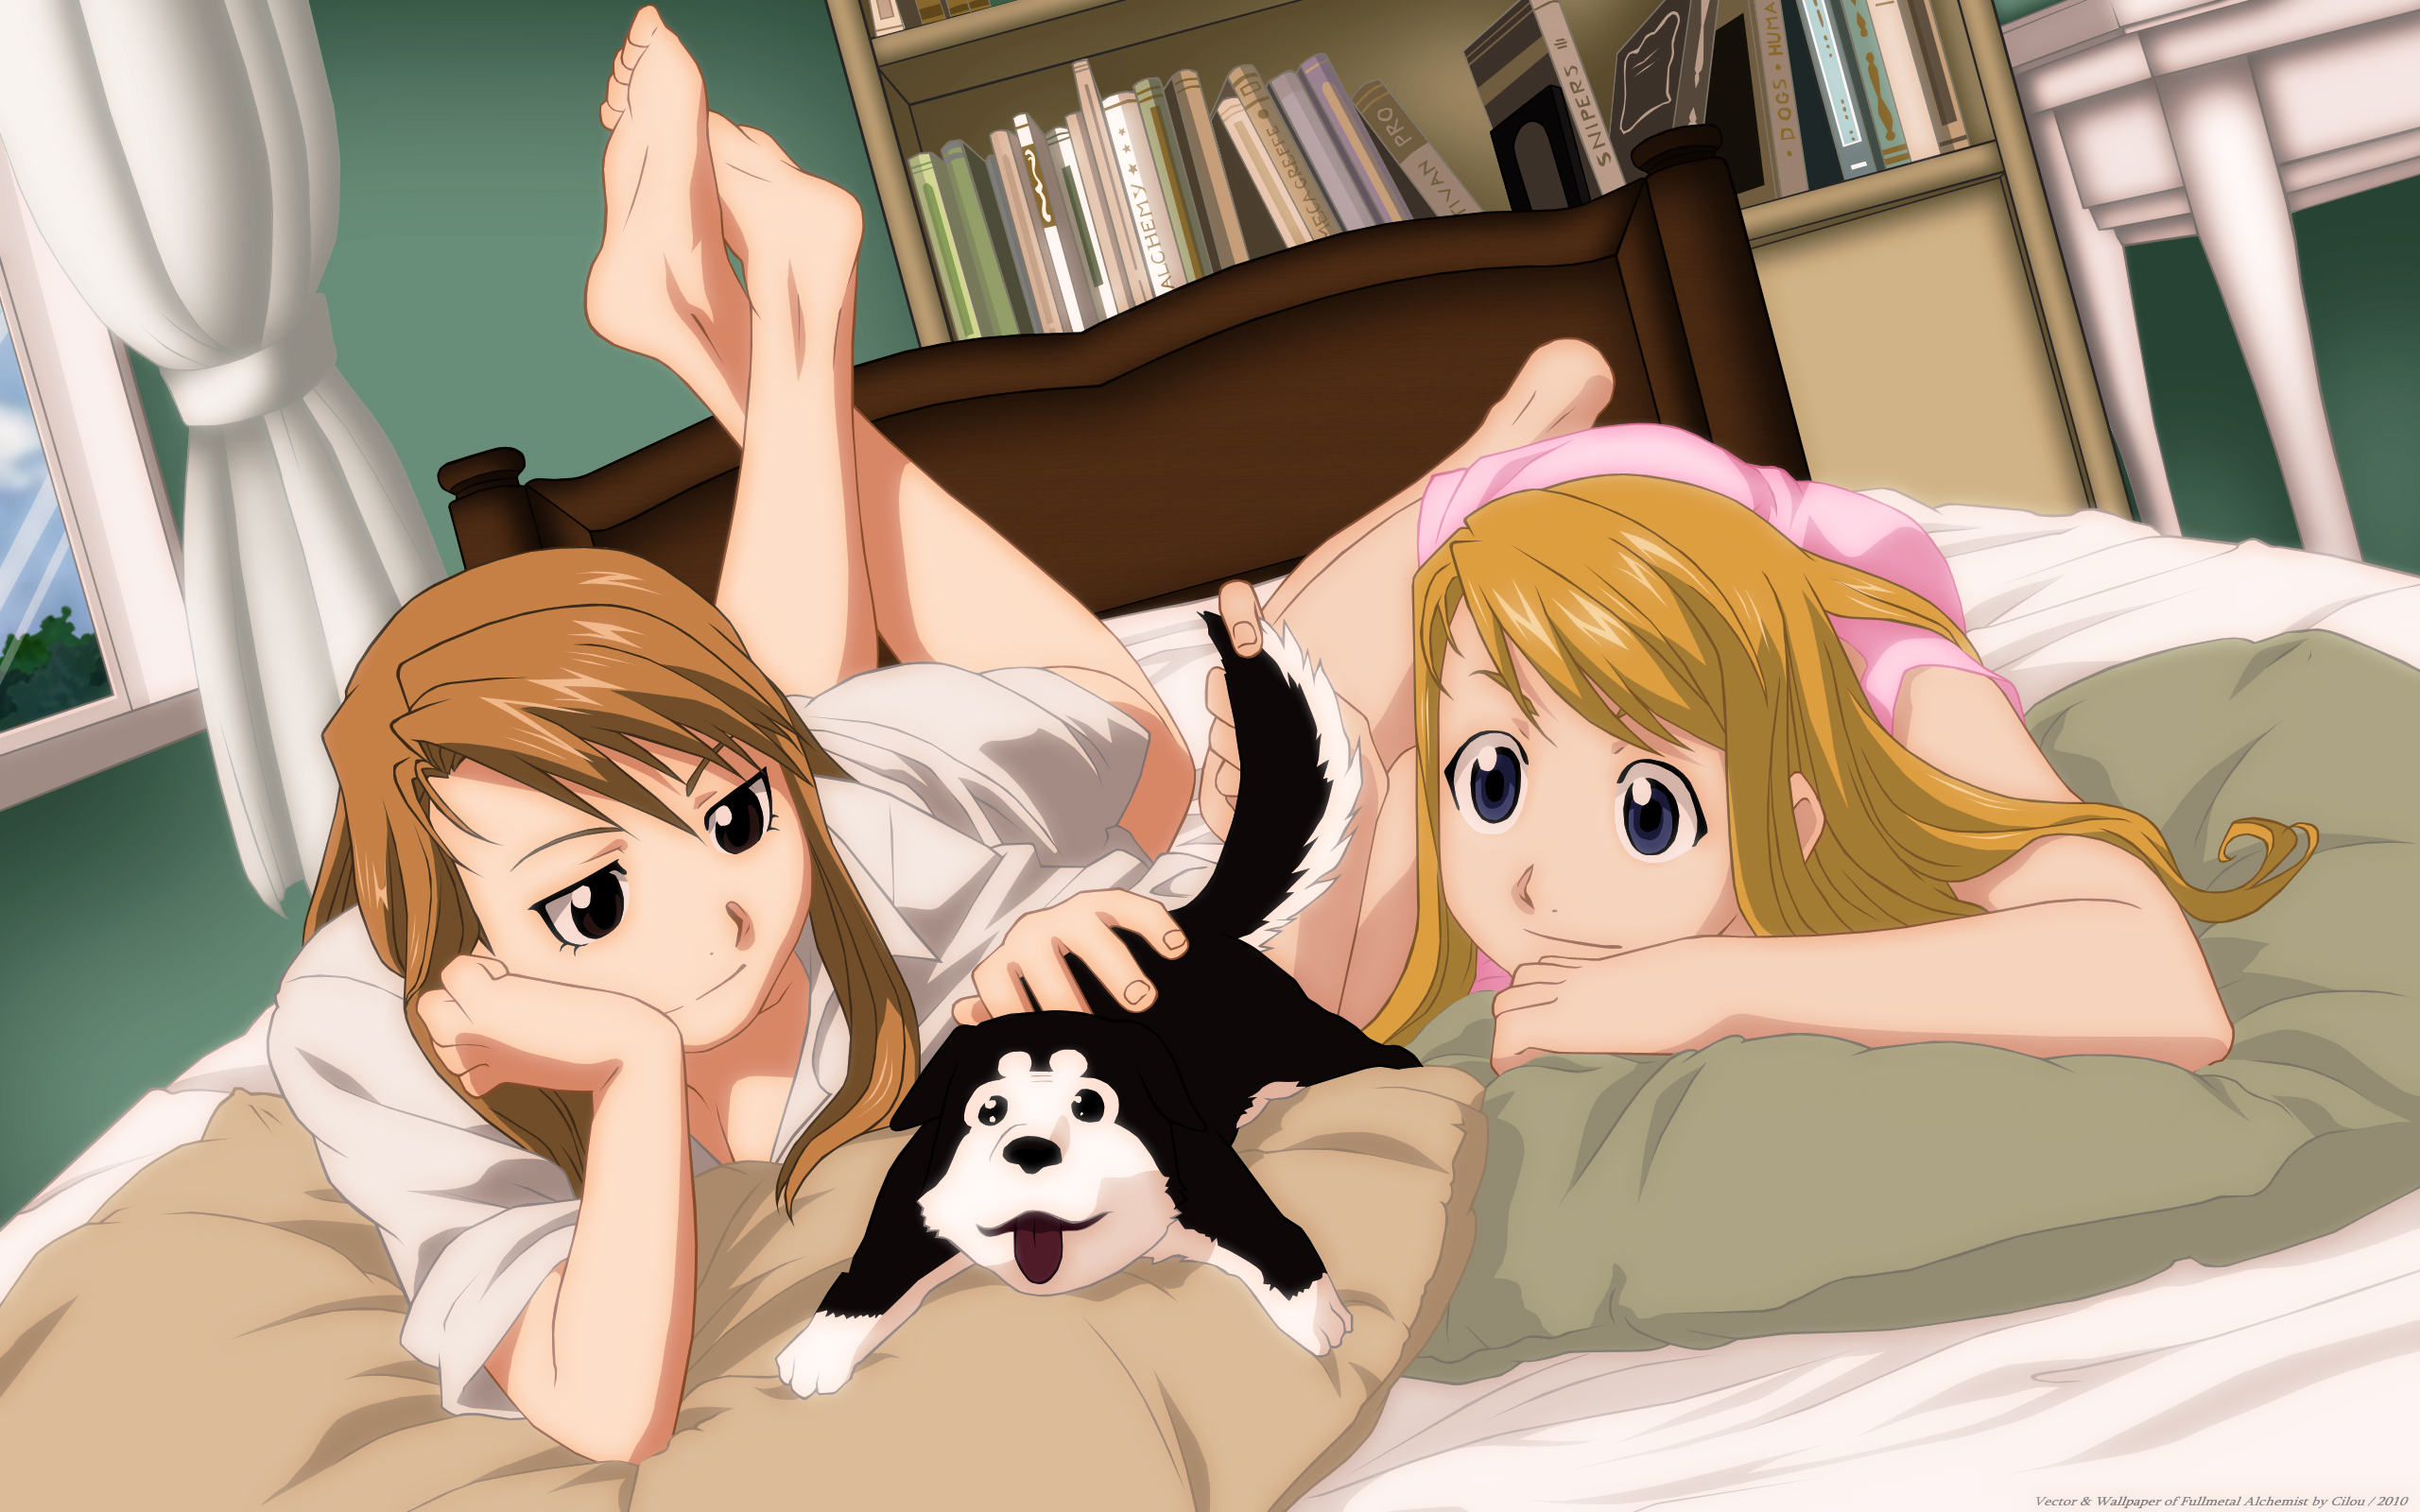 Anime characters Riza Hawkeye and Winry Rockbell from FullMetal Alchemist